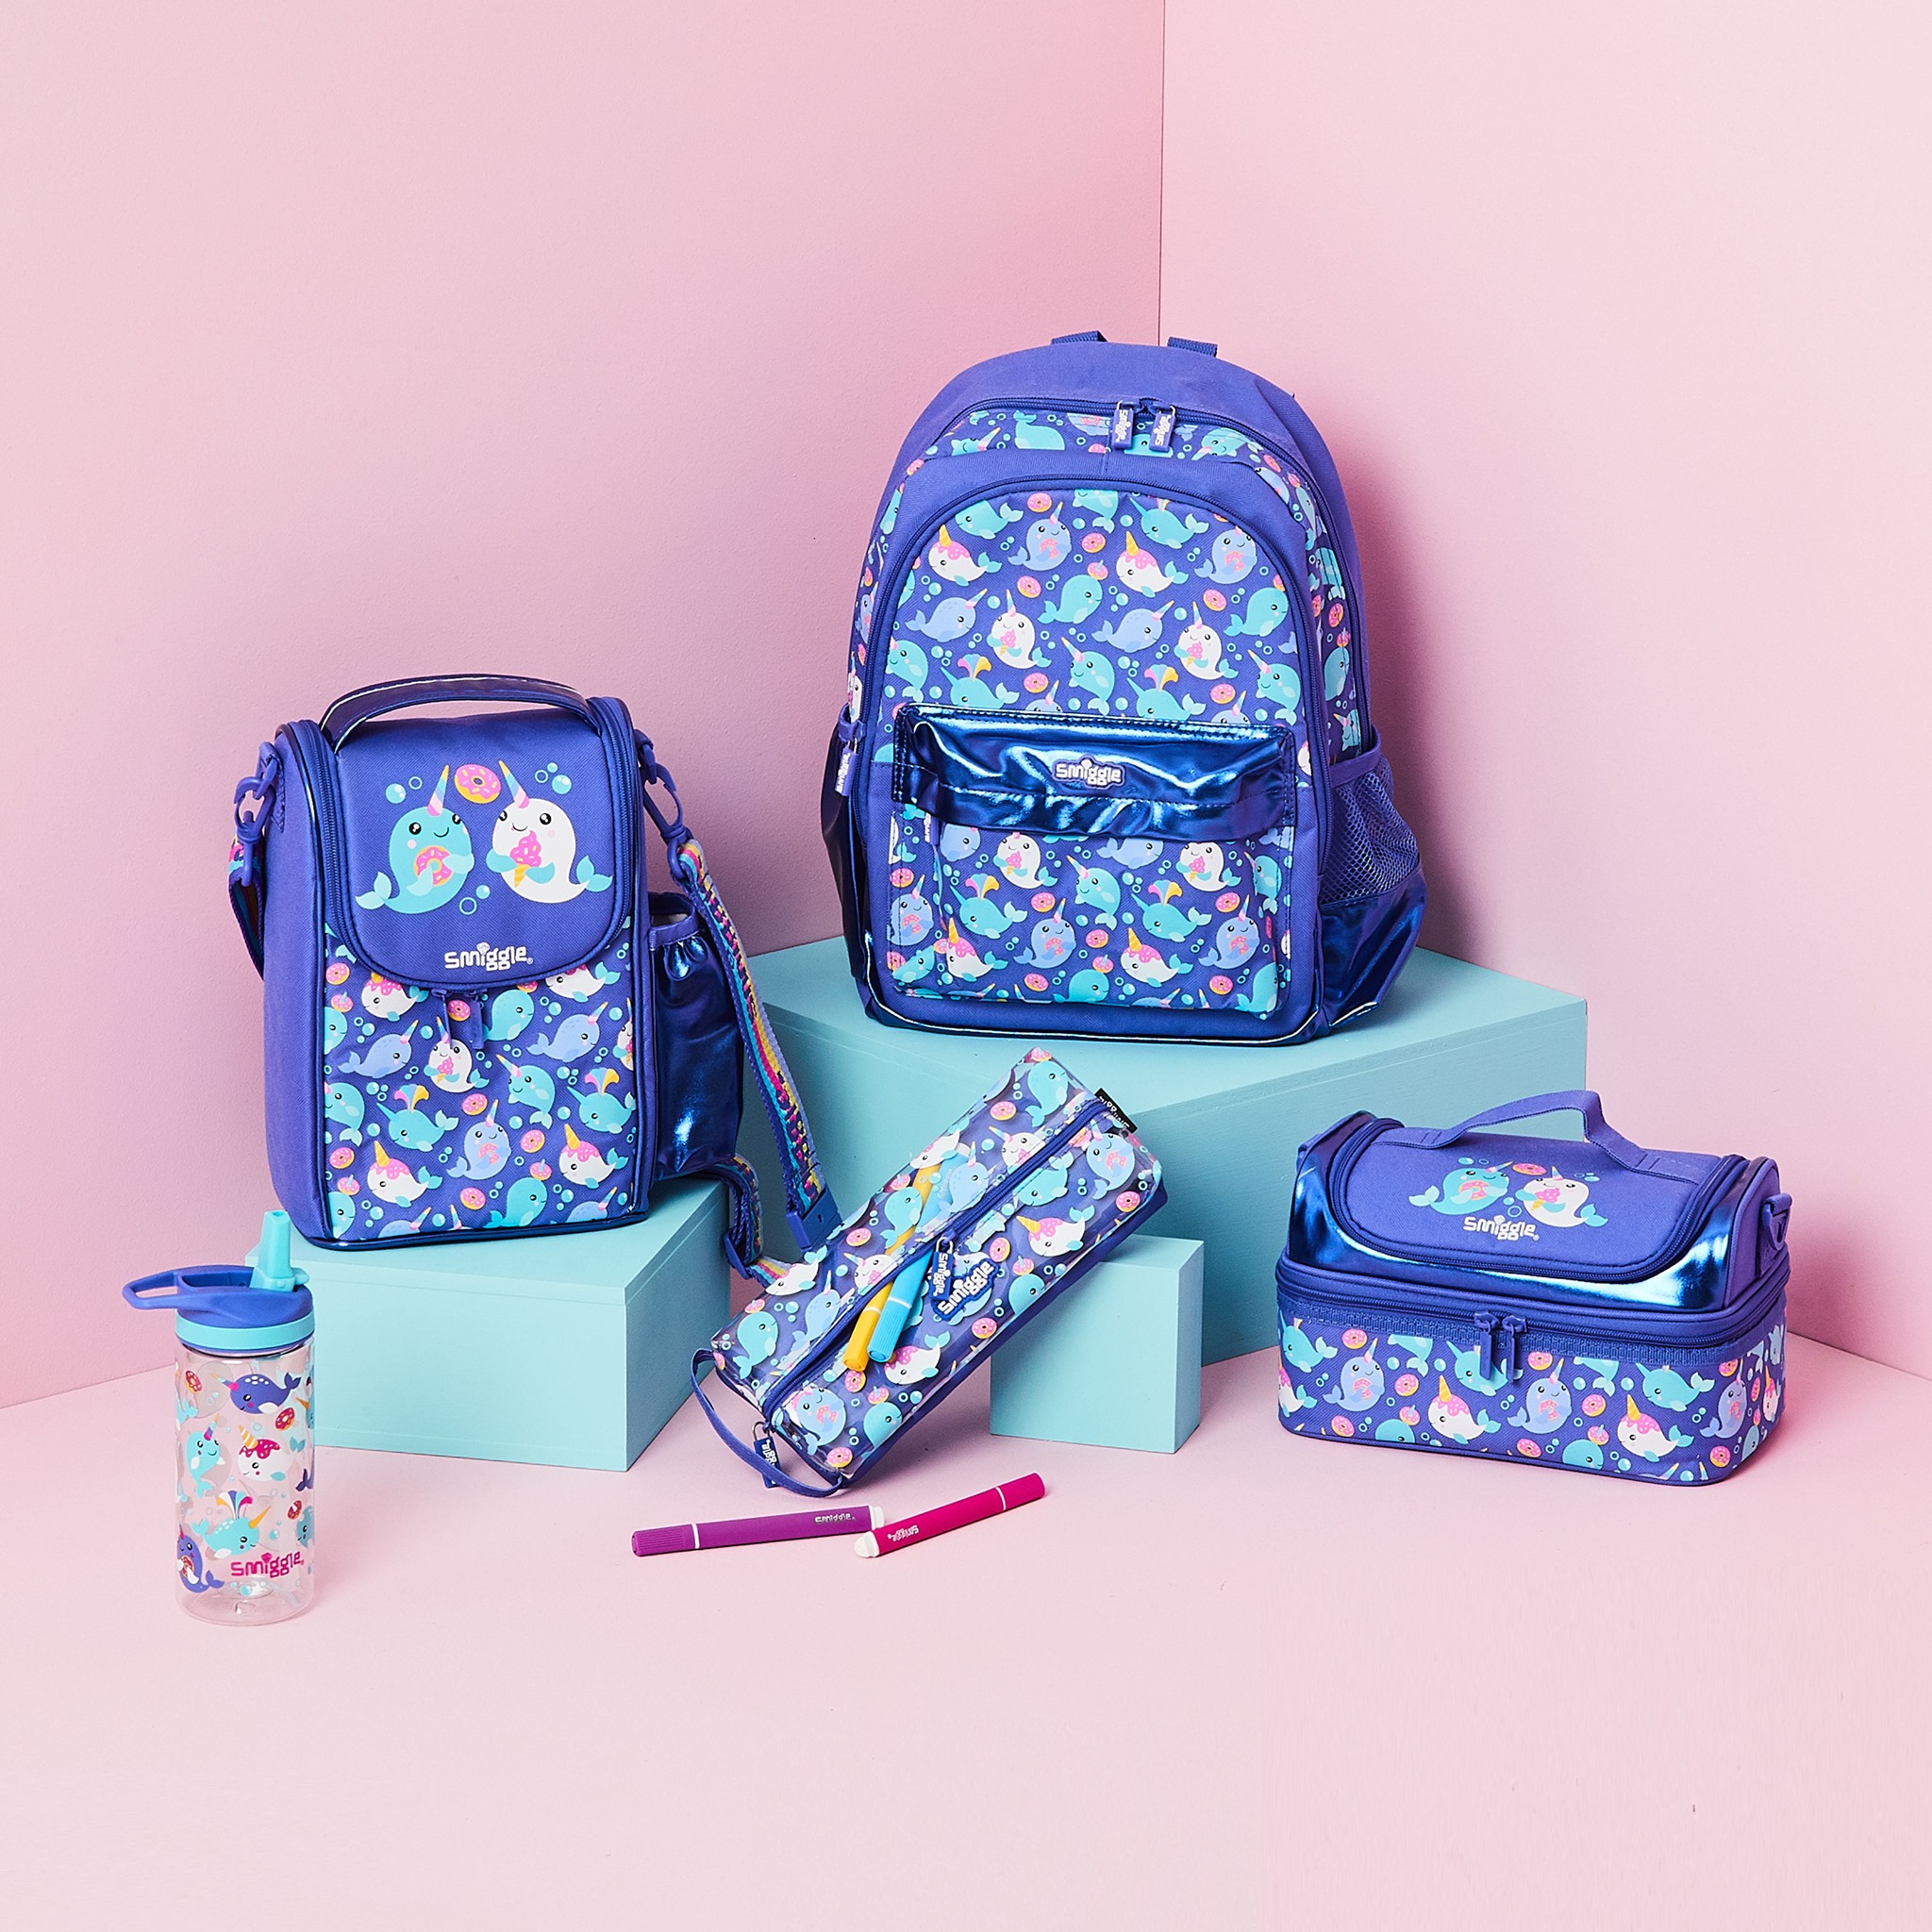 Have a whale of a time in our NEW Whirl collection! 🐳 Shop our new junior collection instore now! 